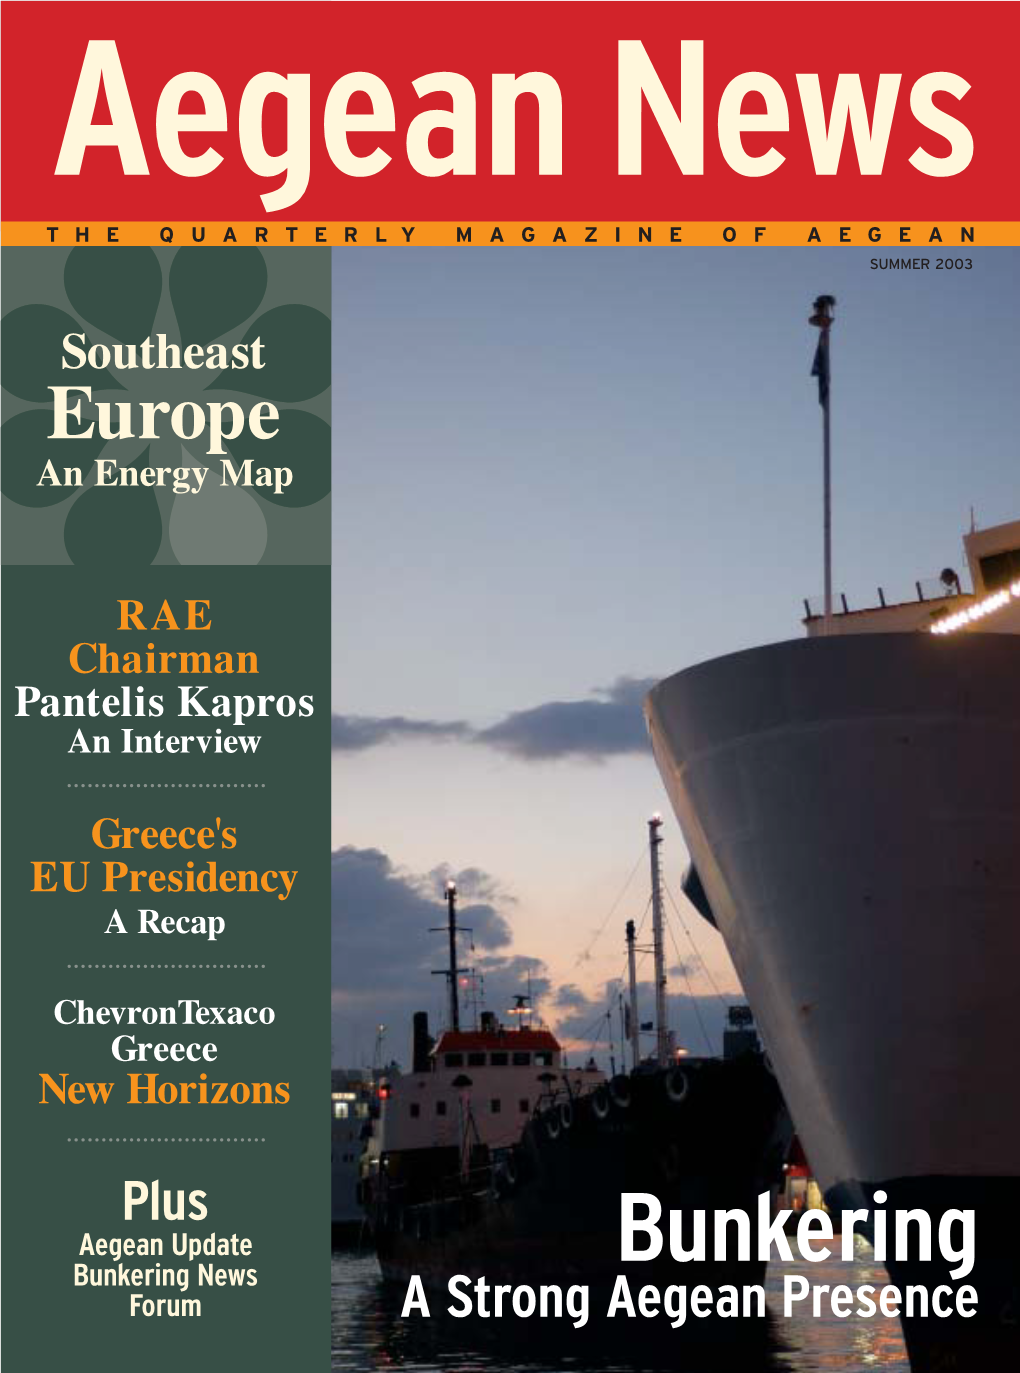 Bunkering News Bunkering Forum a Strong Aegean Presence